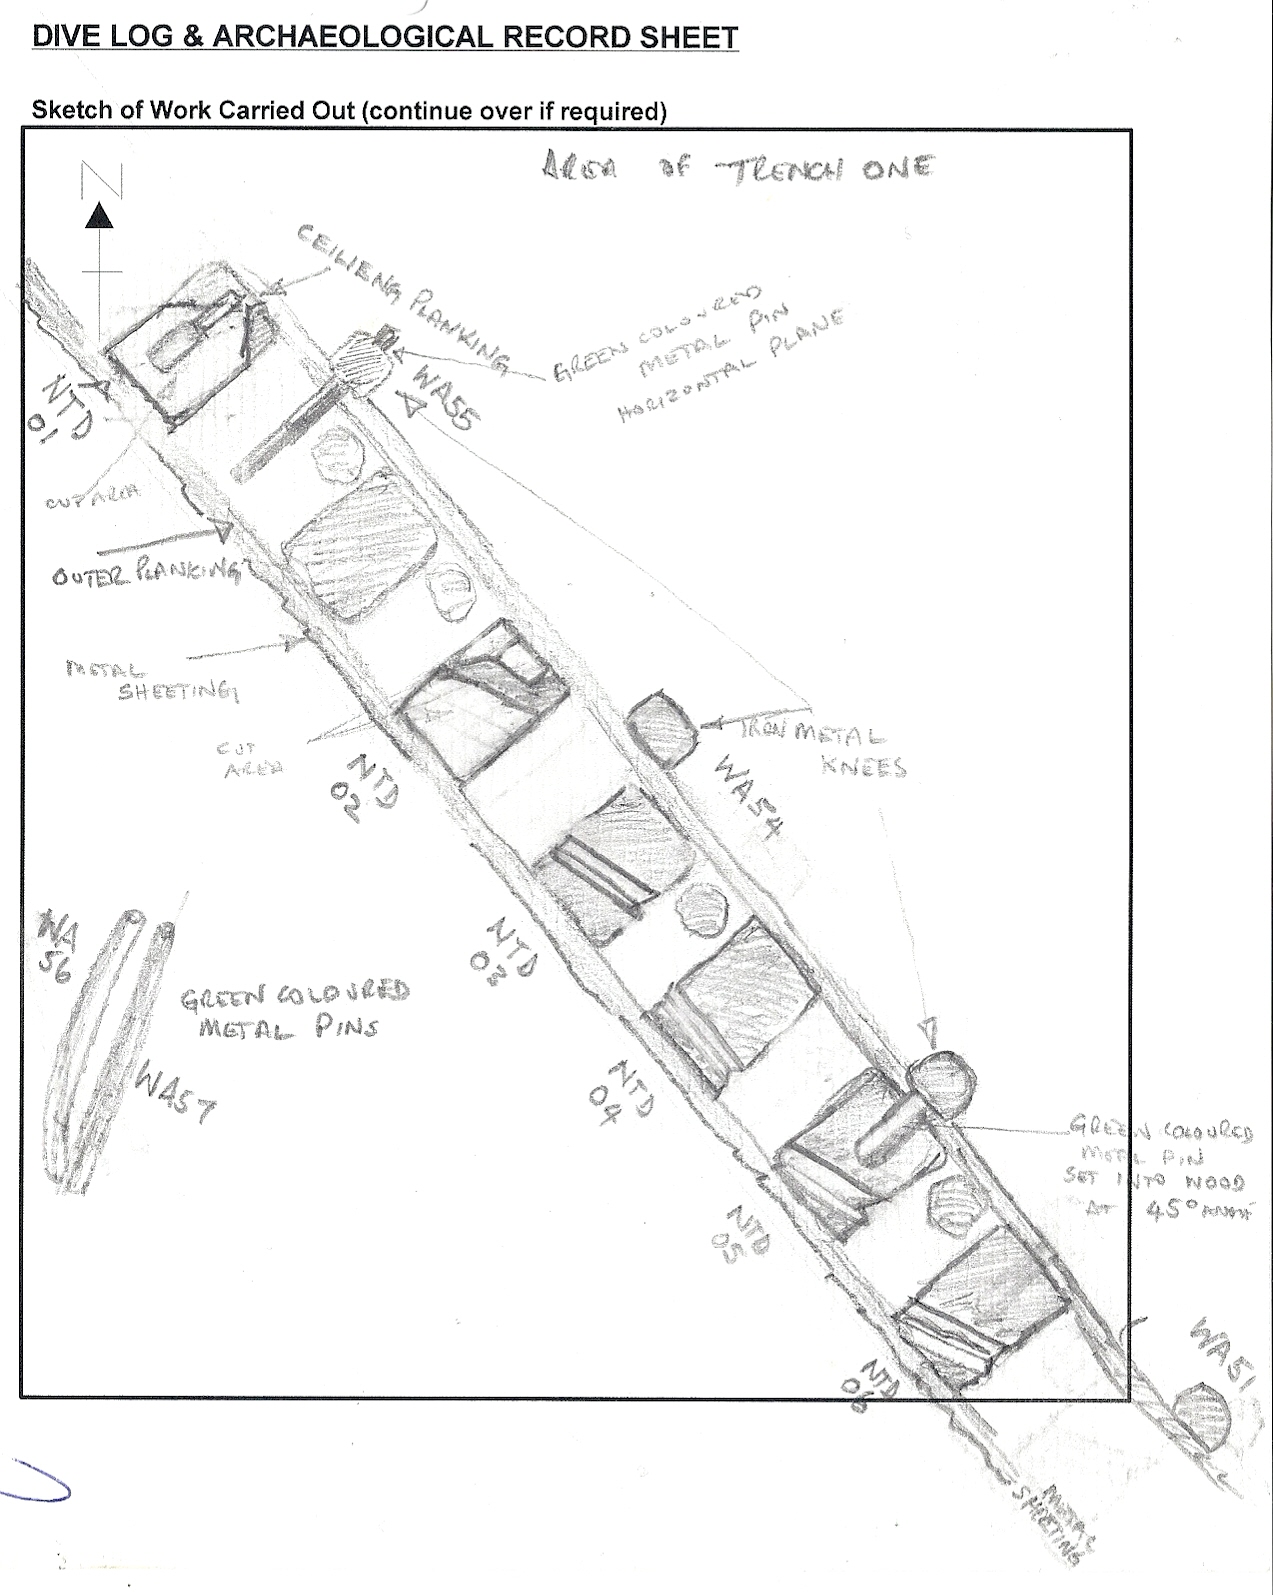 Sketch of the opened trench 